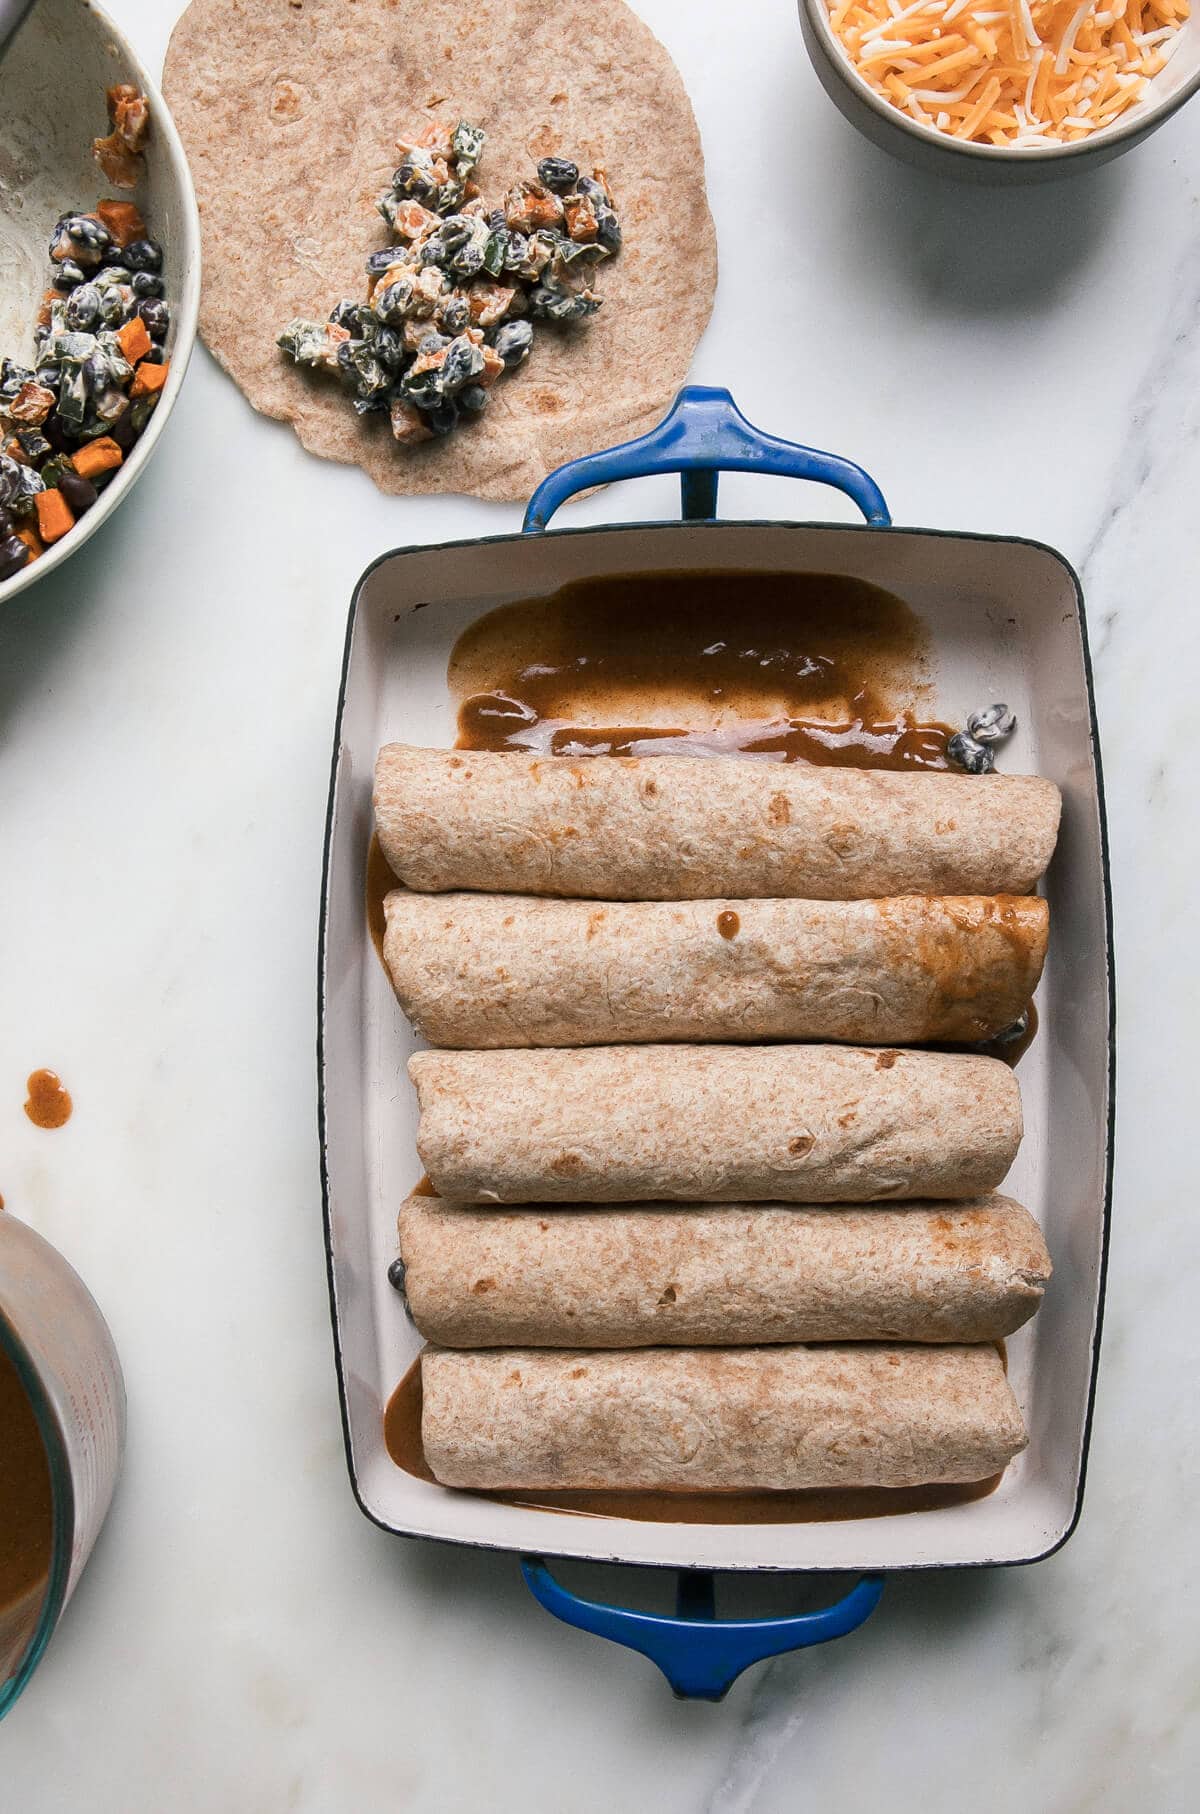 Rolled up tortillas stuffed with filling in a baking dish.